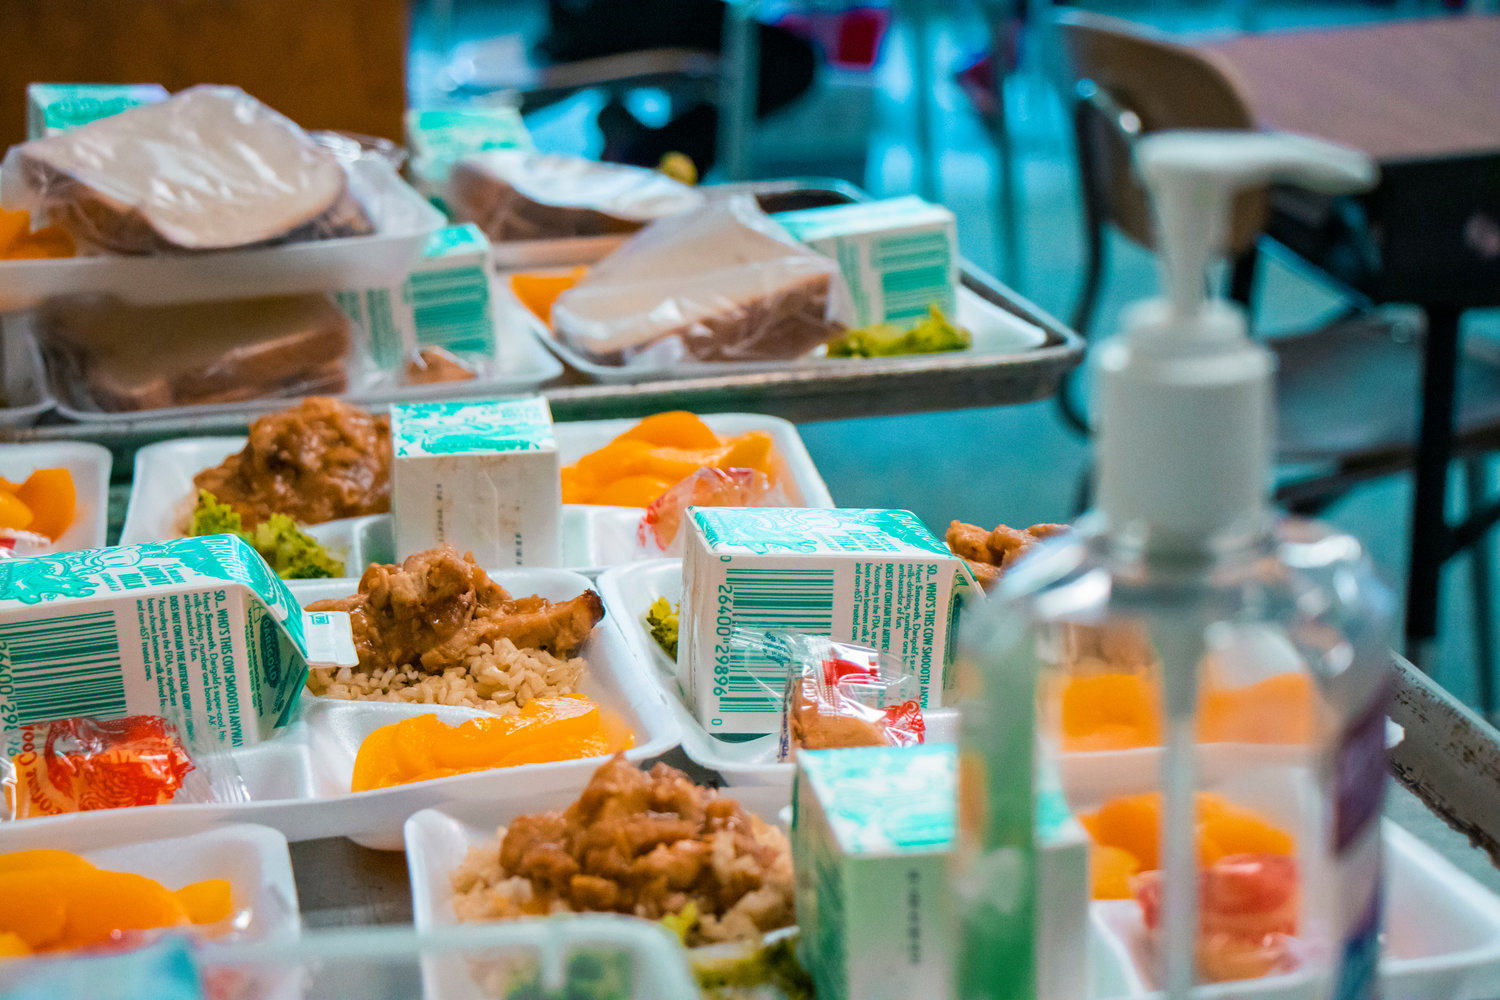 Student lunch is set out next to a bottle of hand sanitizer in Onalaska on Tuesday.